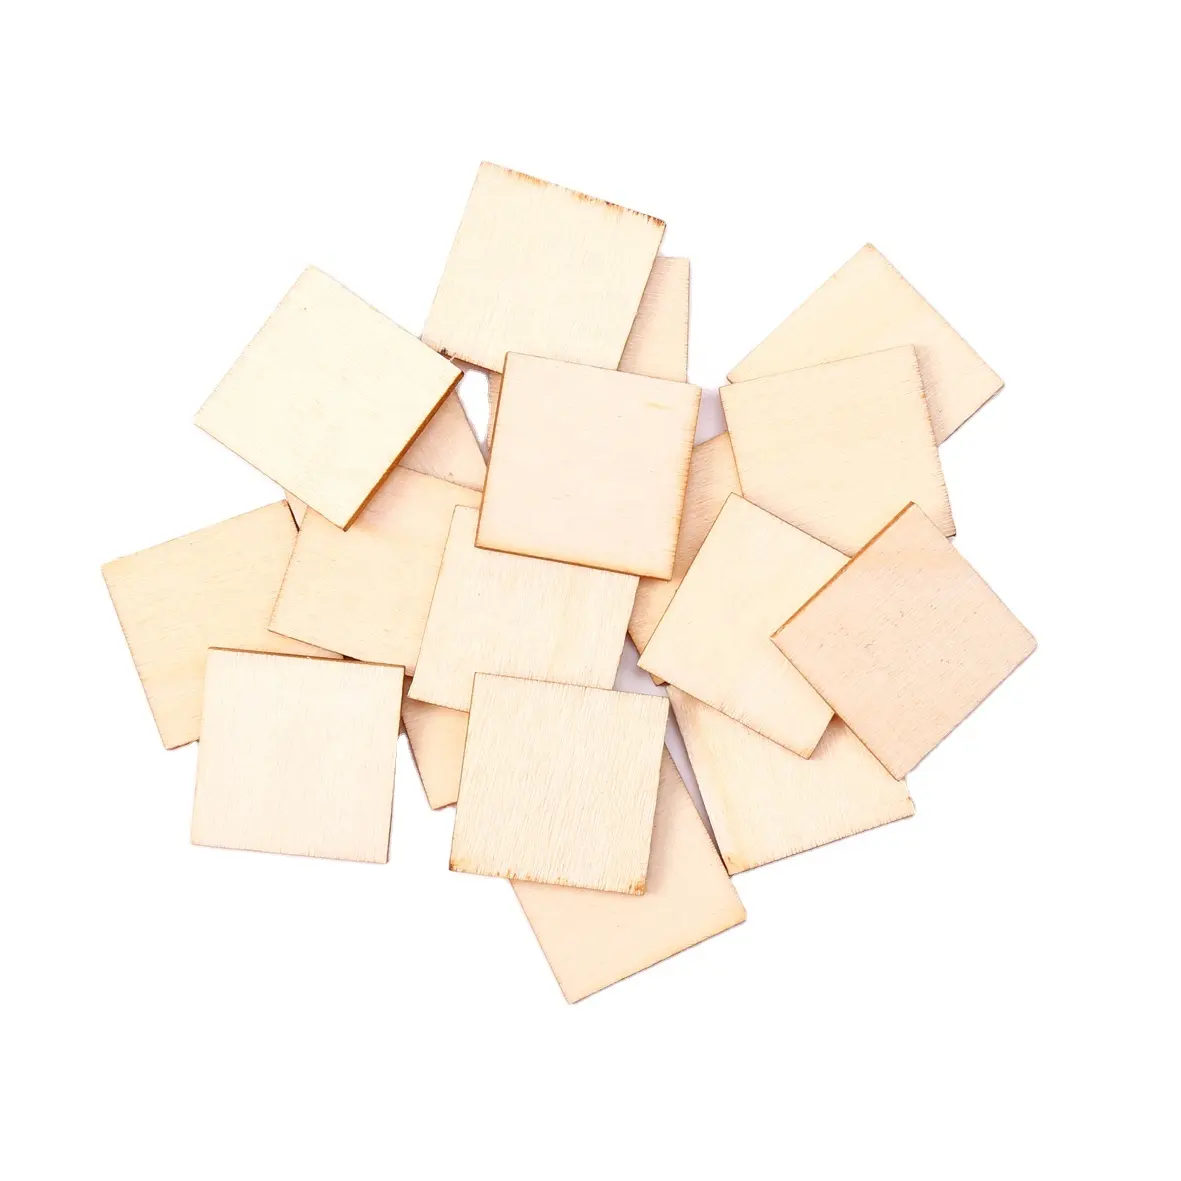 100pcs 20mm Unfinished Natural Color Wooden Square Cutouts Blank Pieces For DIY Arts Crafts Scrapooking